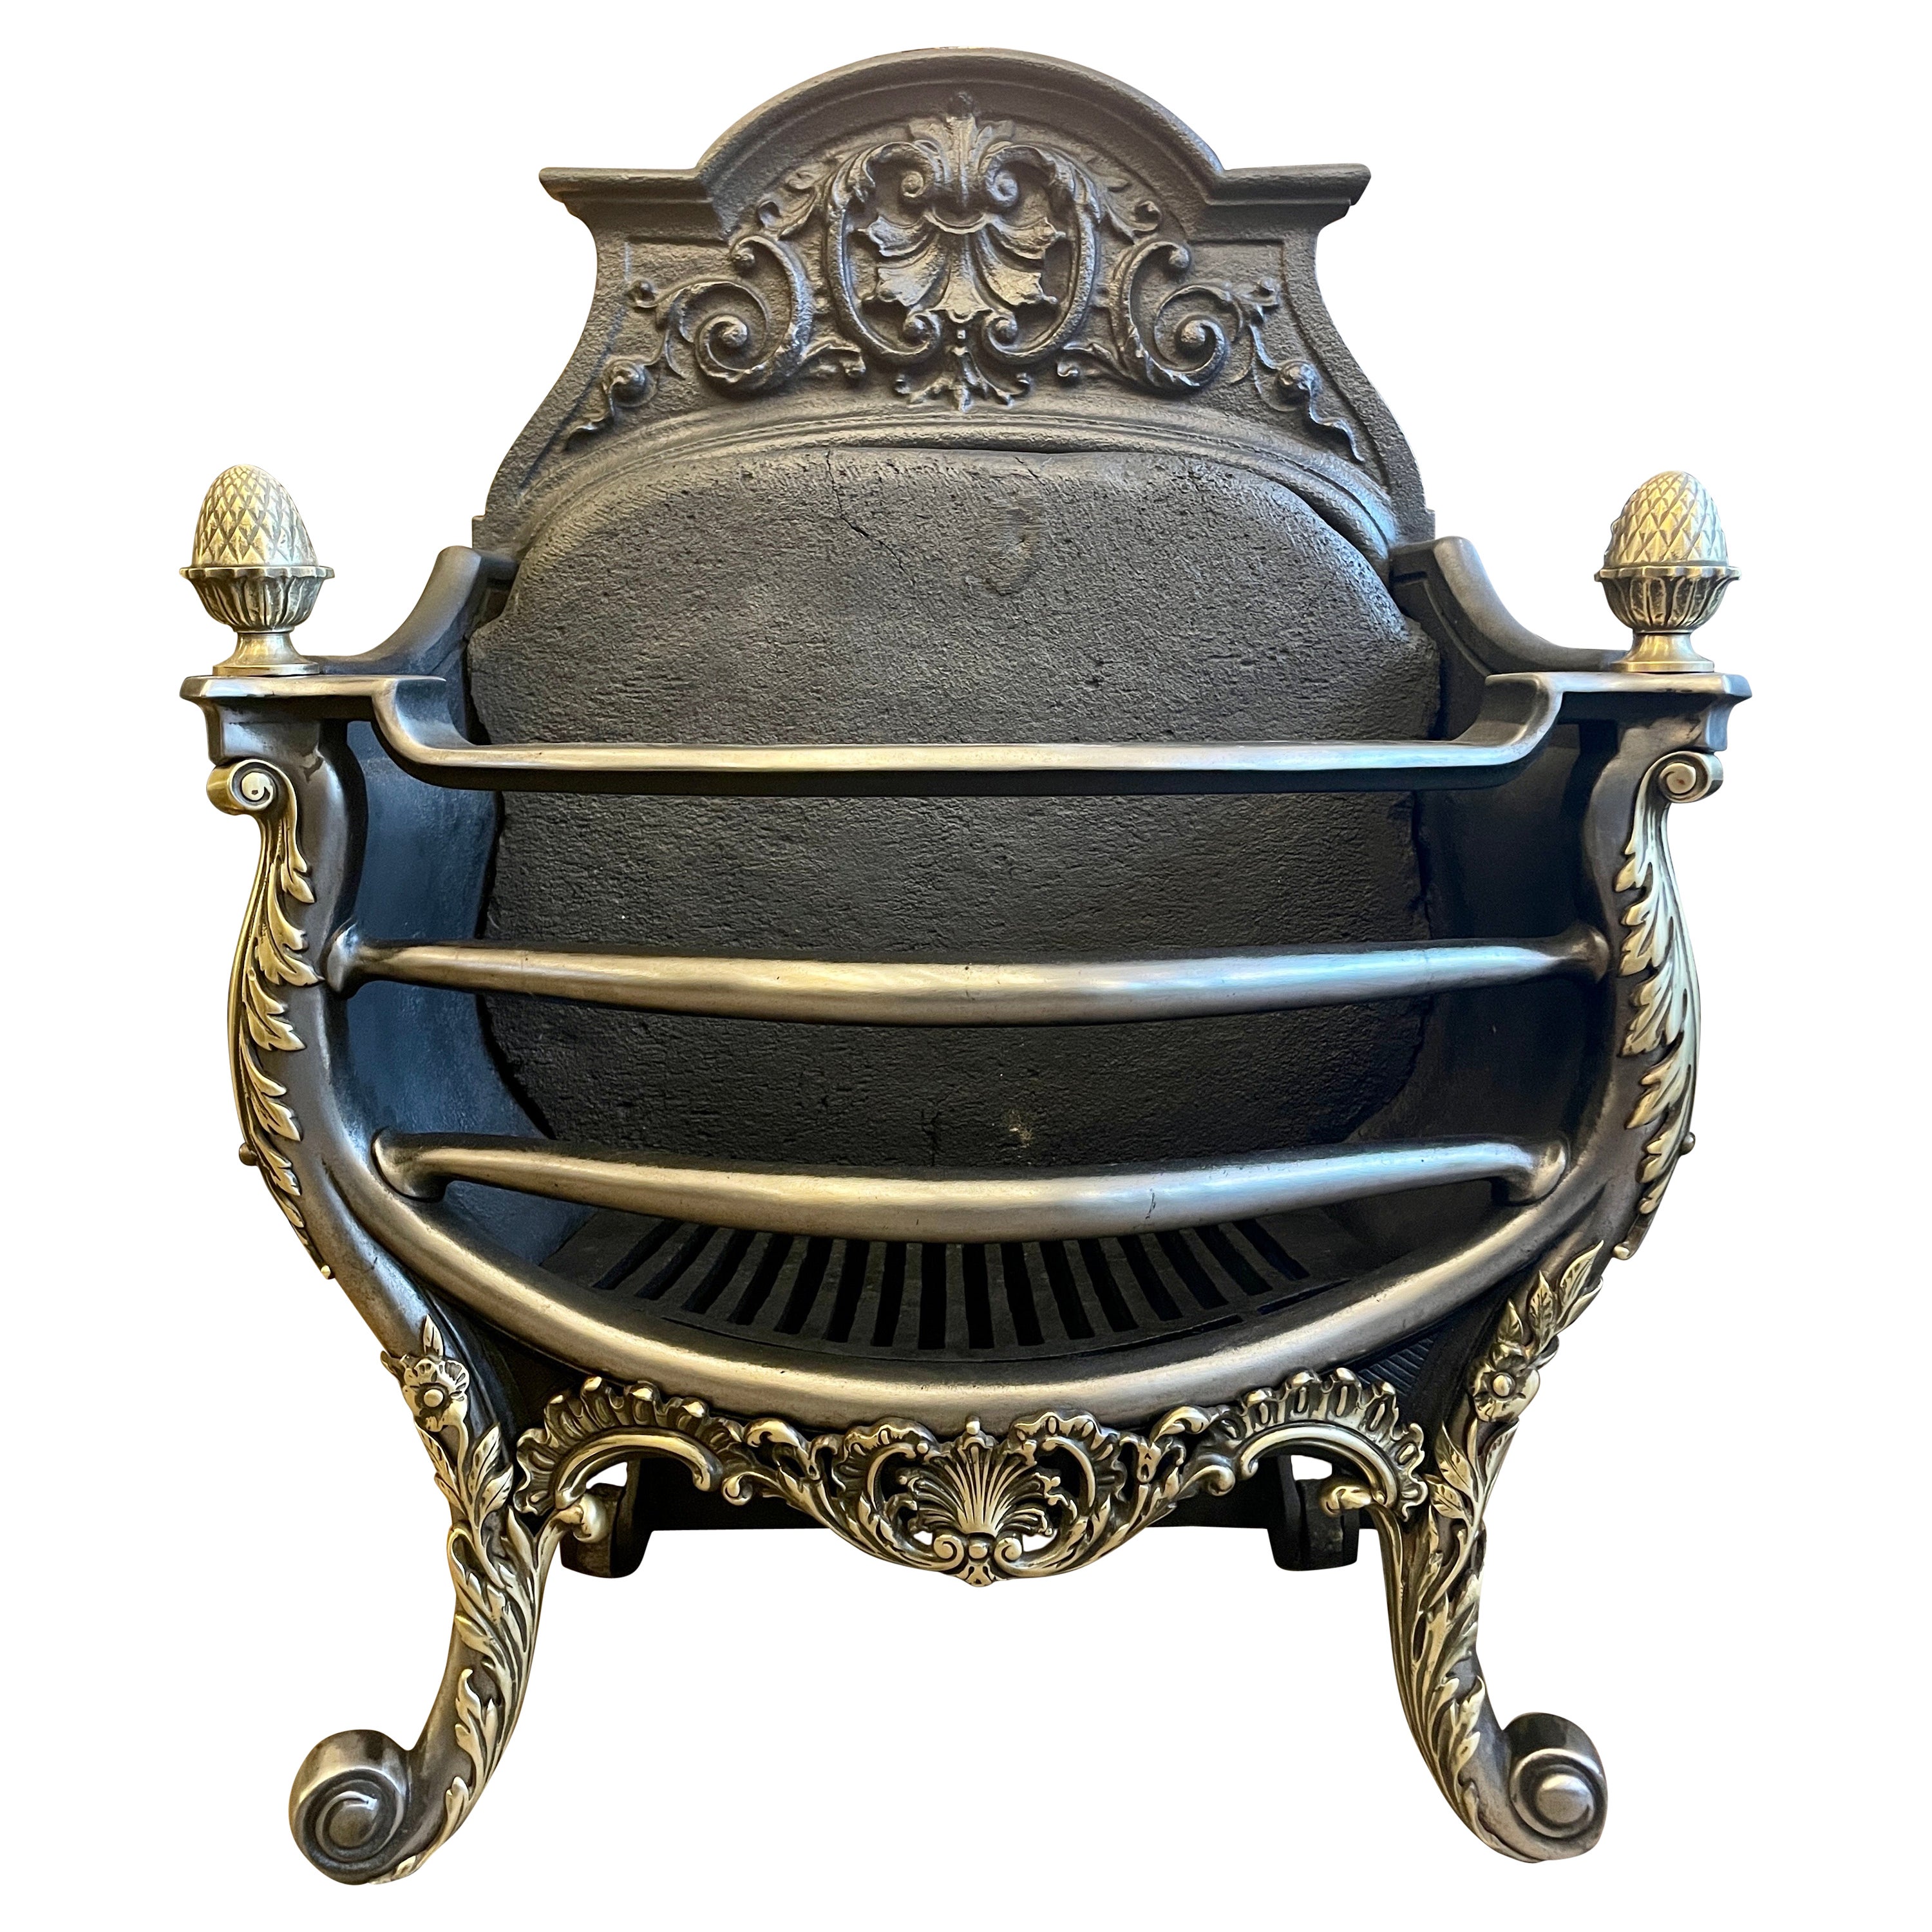 Antique English Rococo Style Fire Basket For Sale